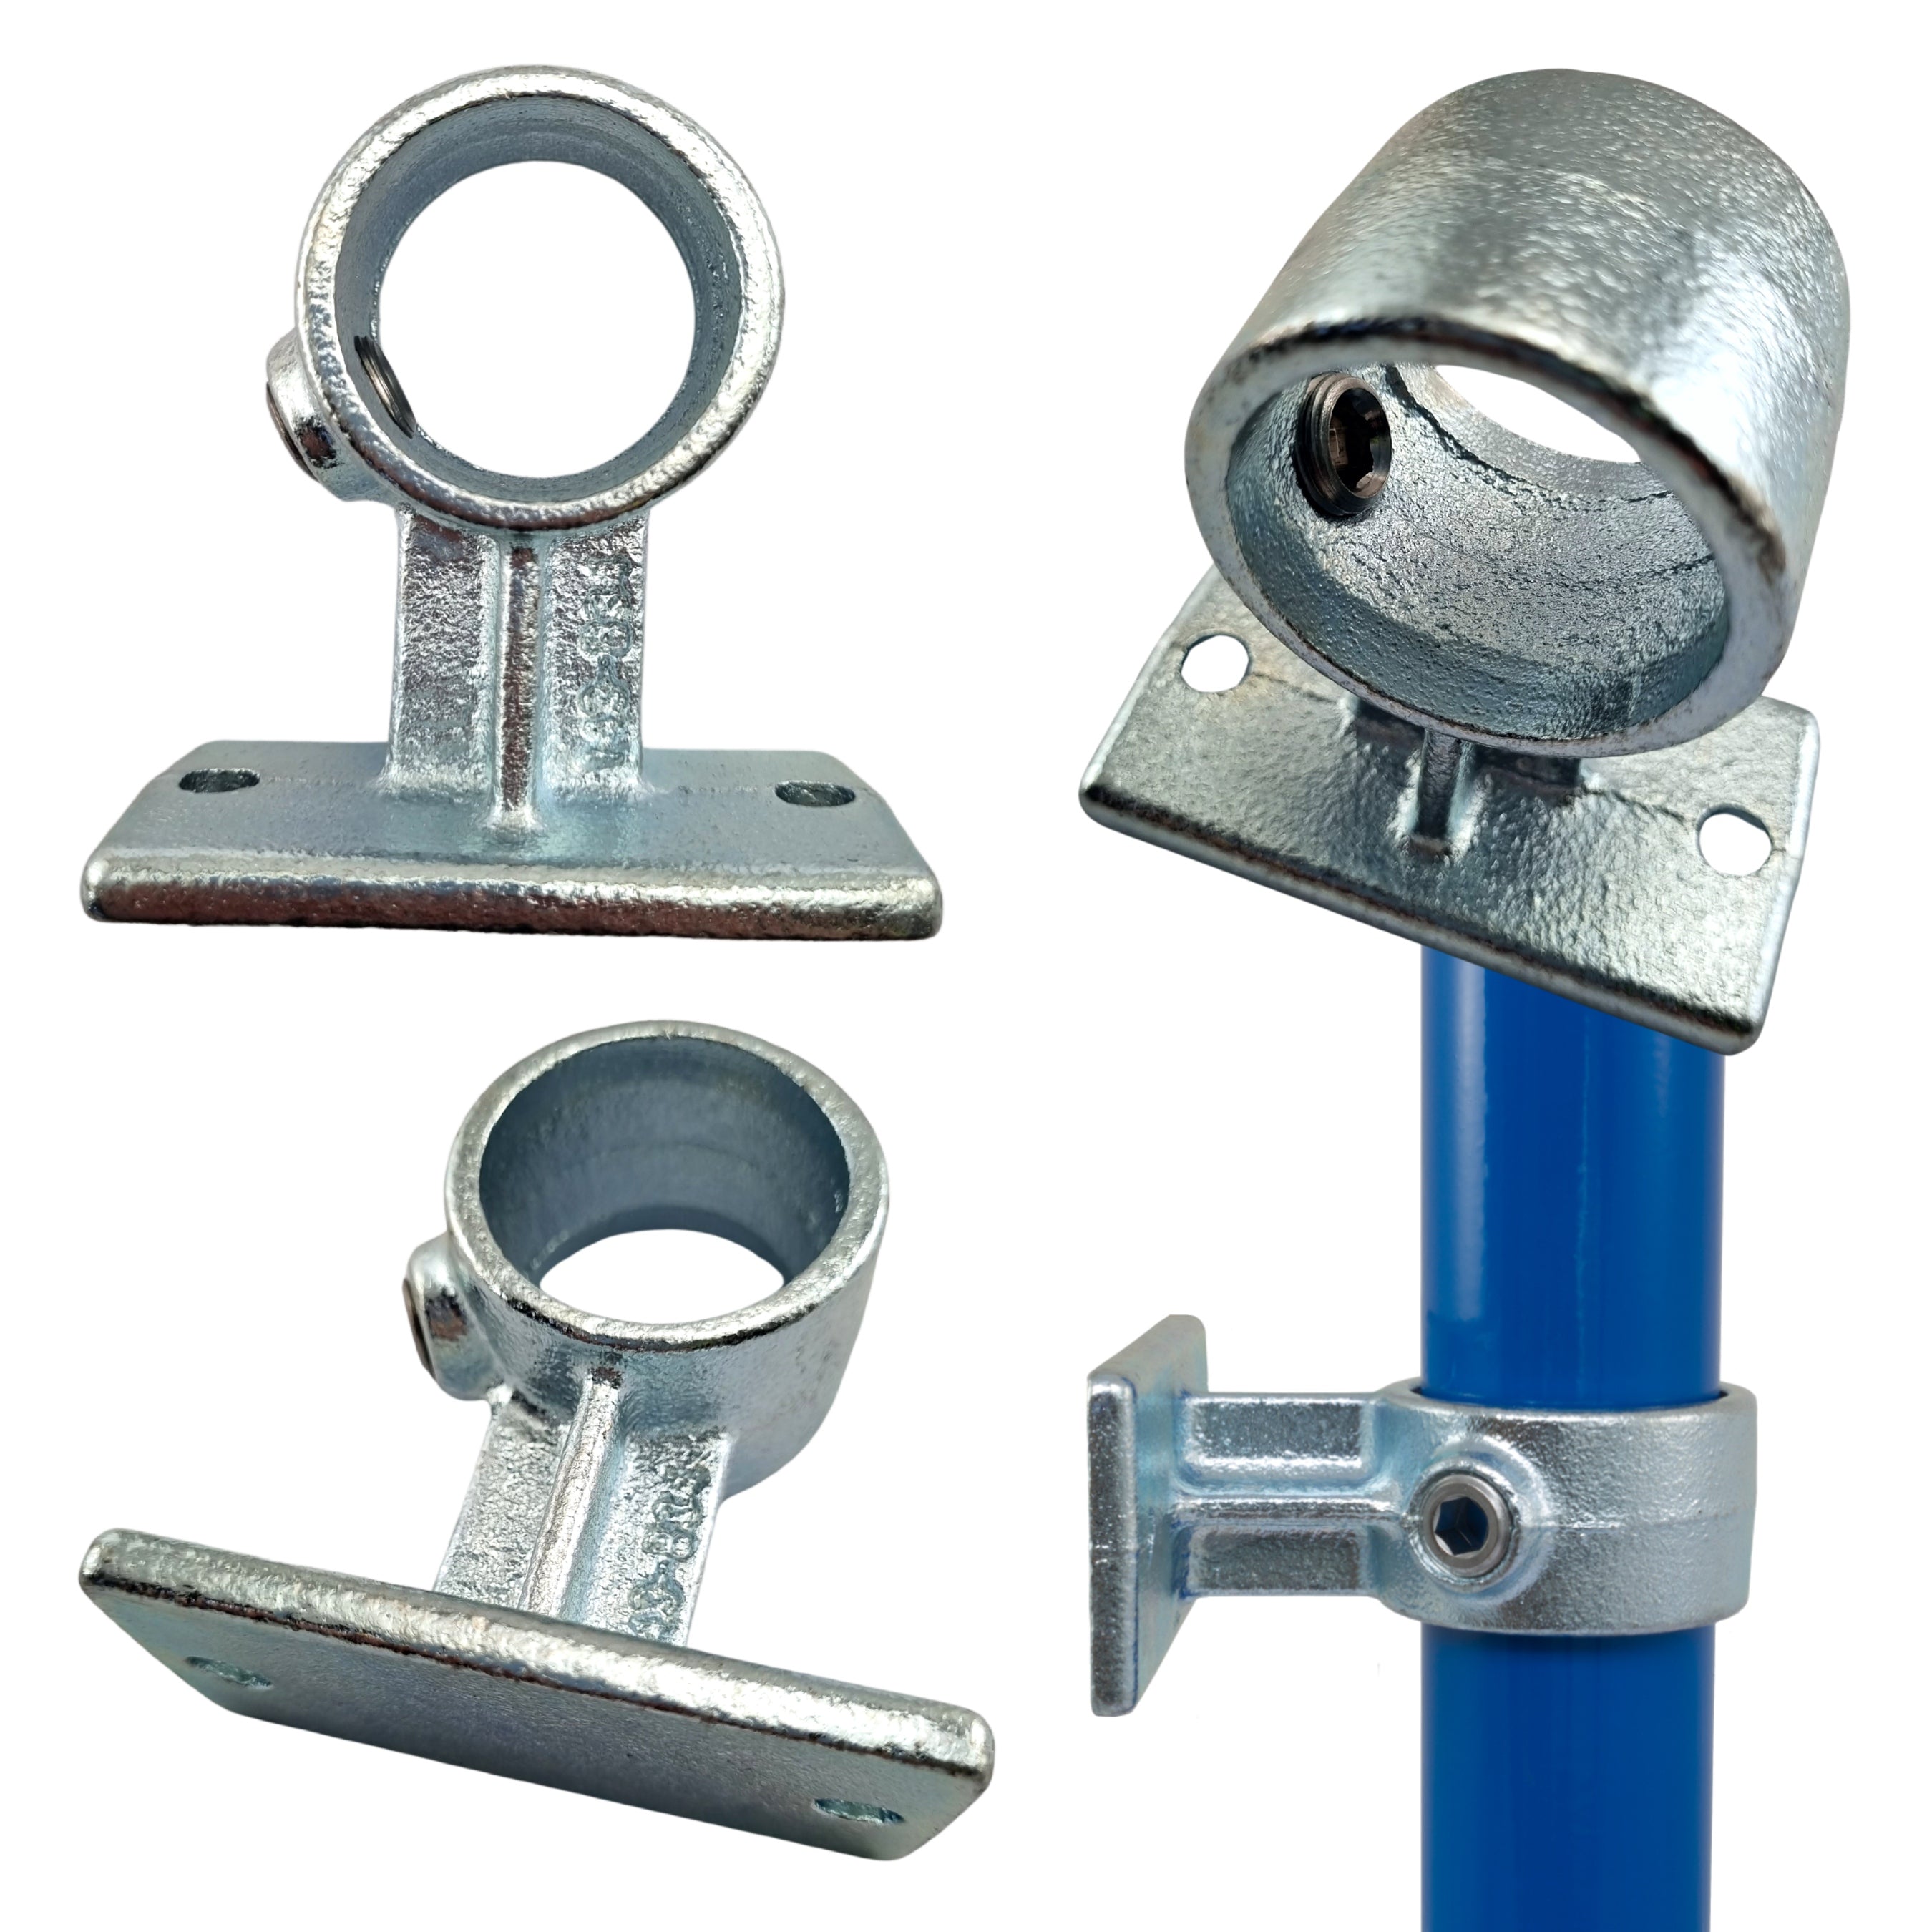 Handrail Bracket for Galvanised Pipe. Interclamp Code 143. Shop rail & pipe fittings online chain.com.au. Australia wide shipping.